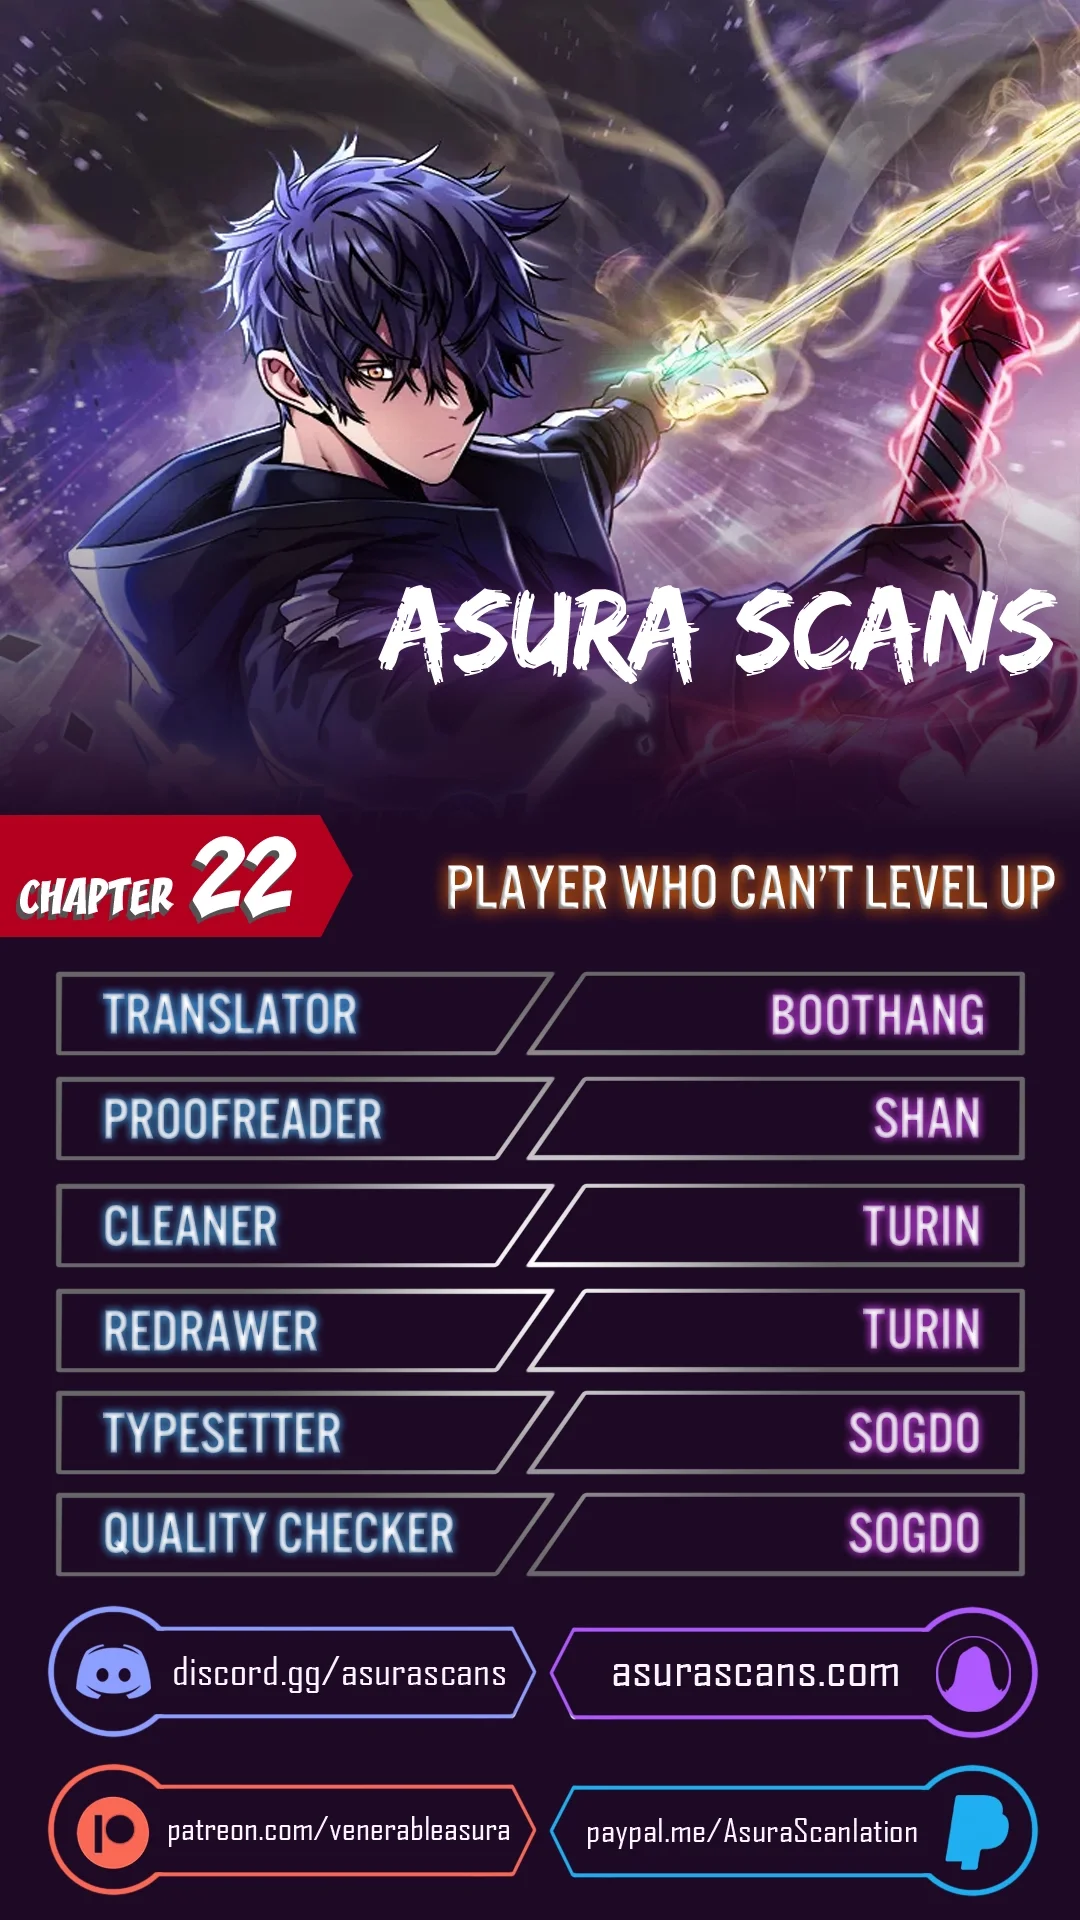 player-who-cant-level-up-chap-22-0